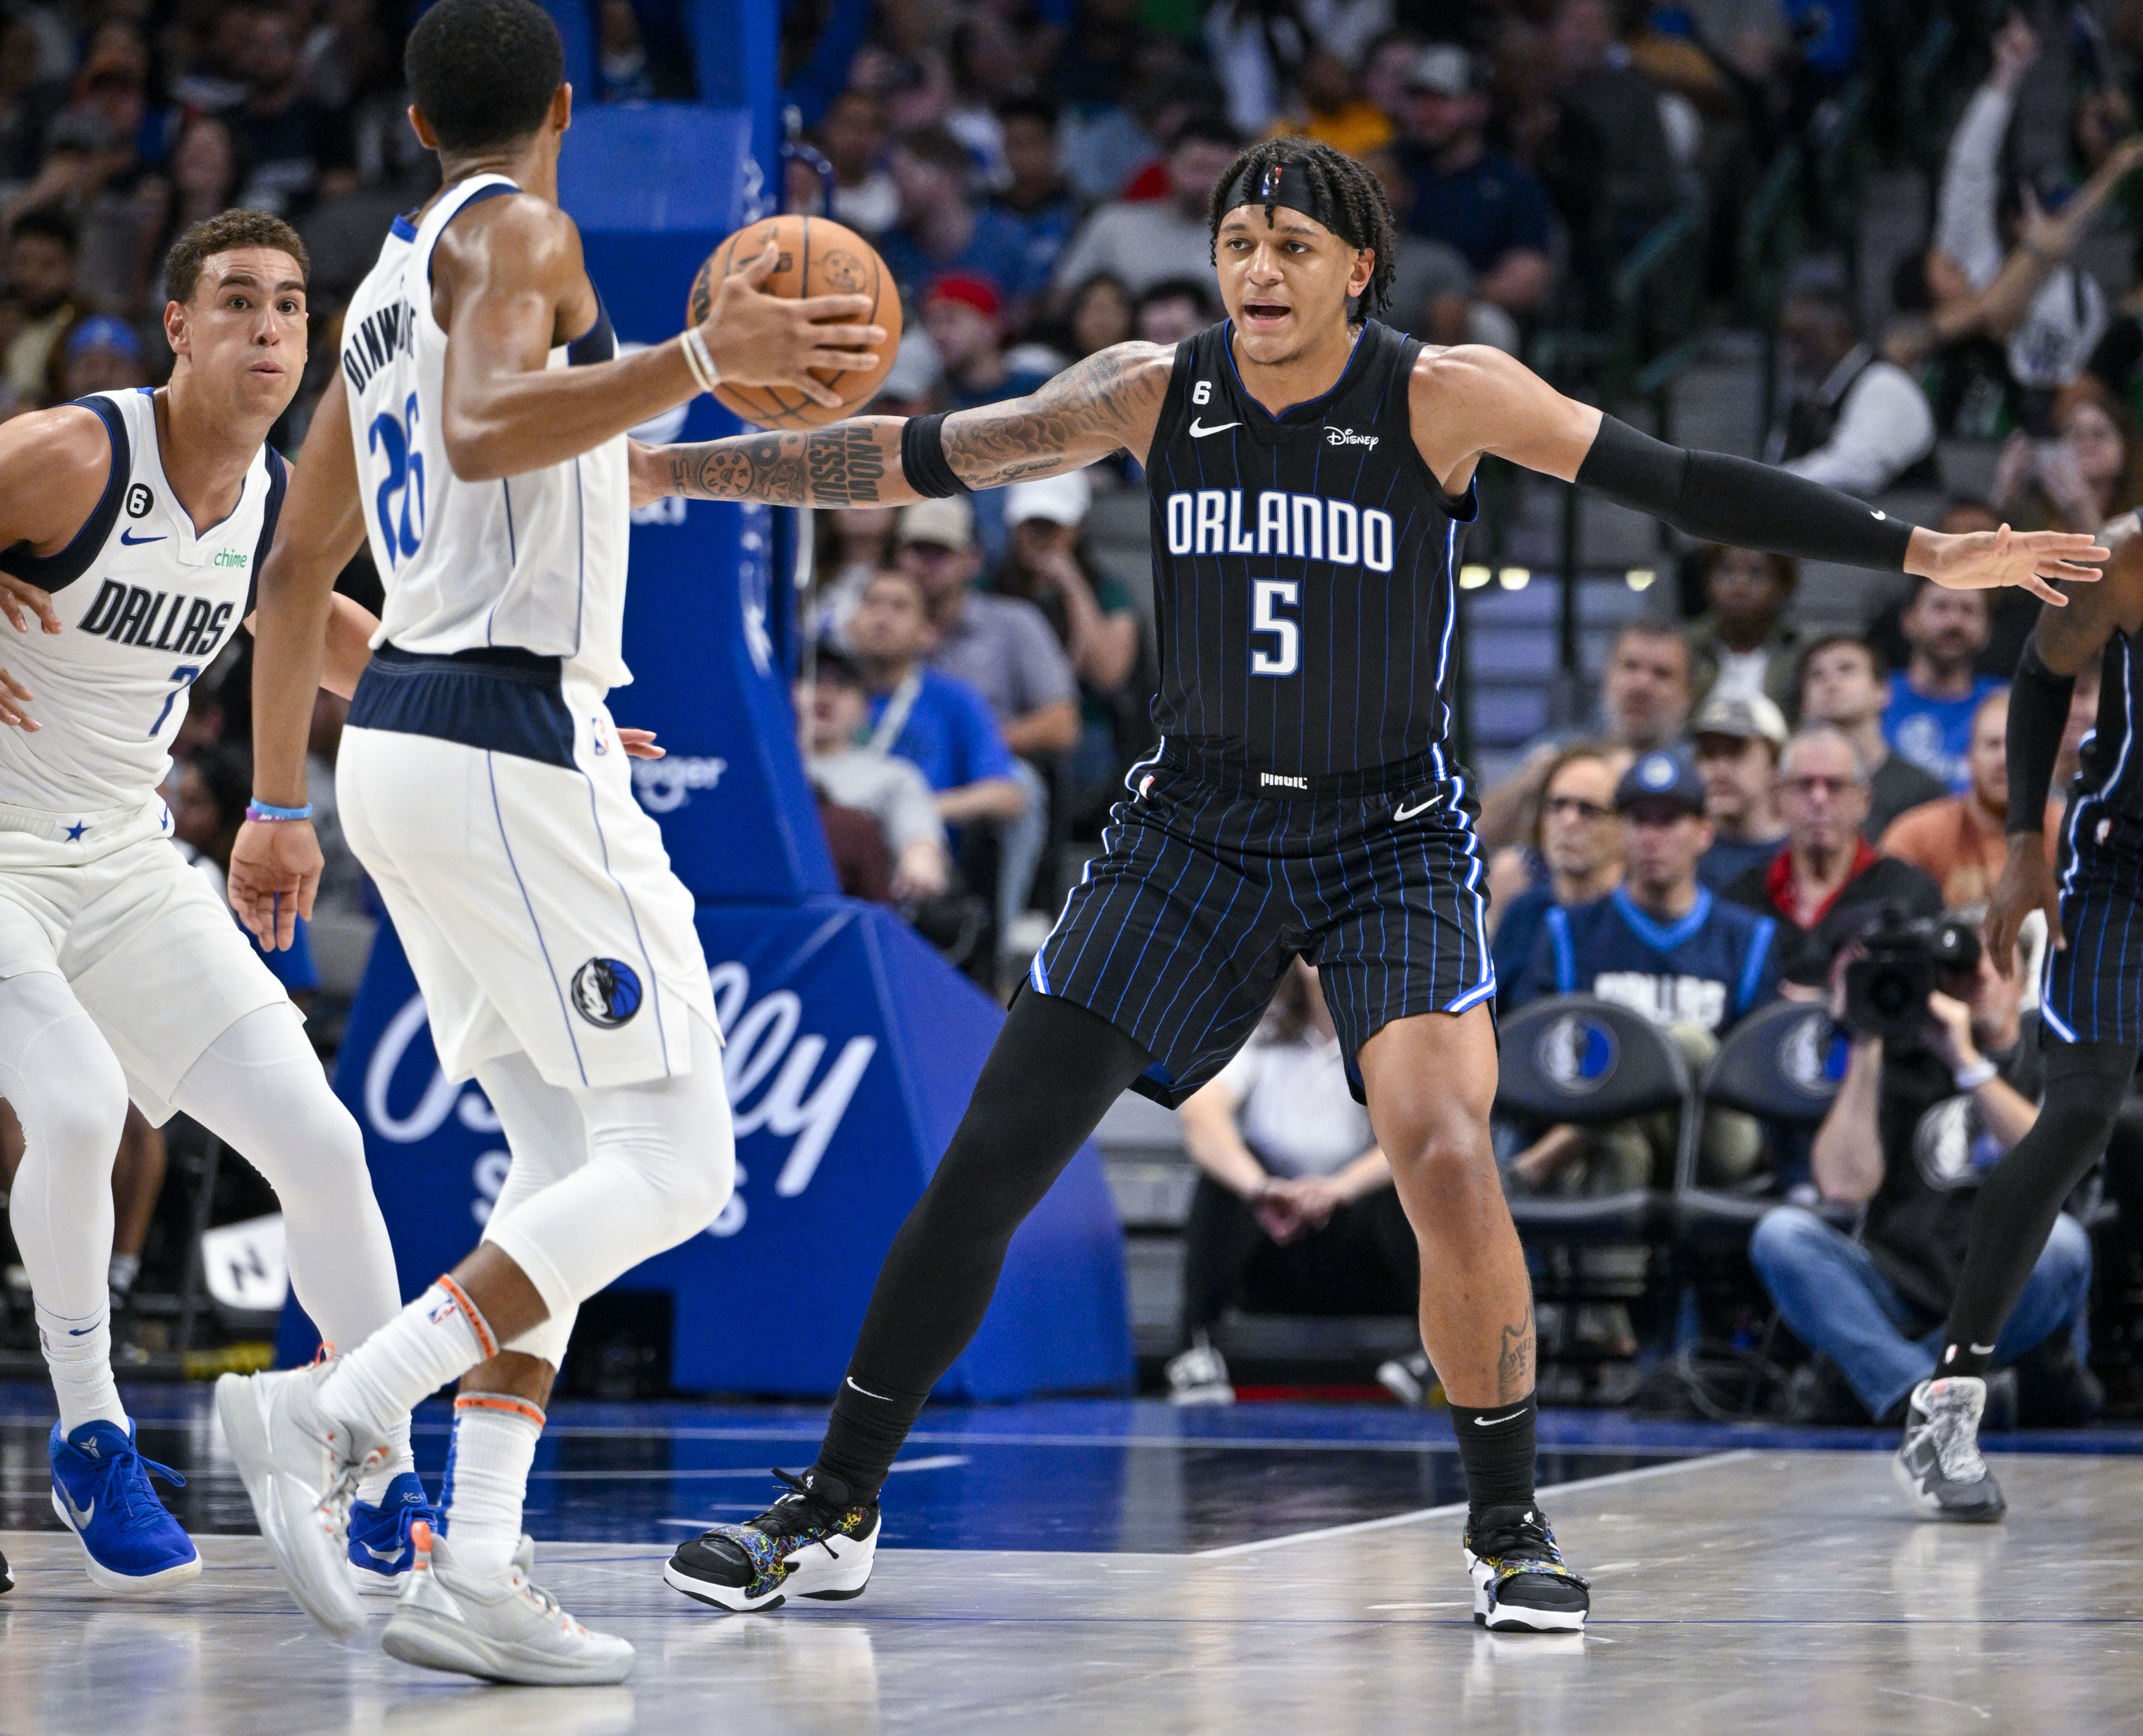 Orlando Magic's young roster now includes young star Paolo Banchero